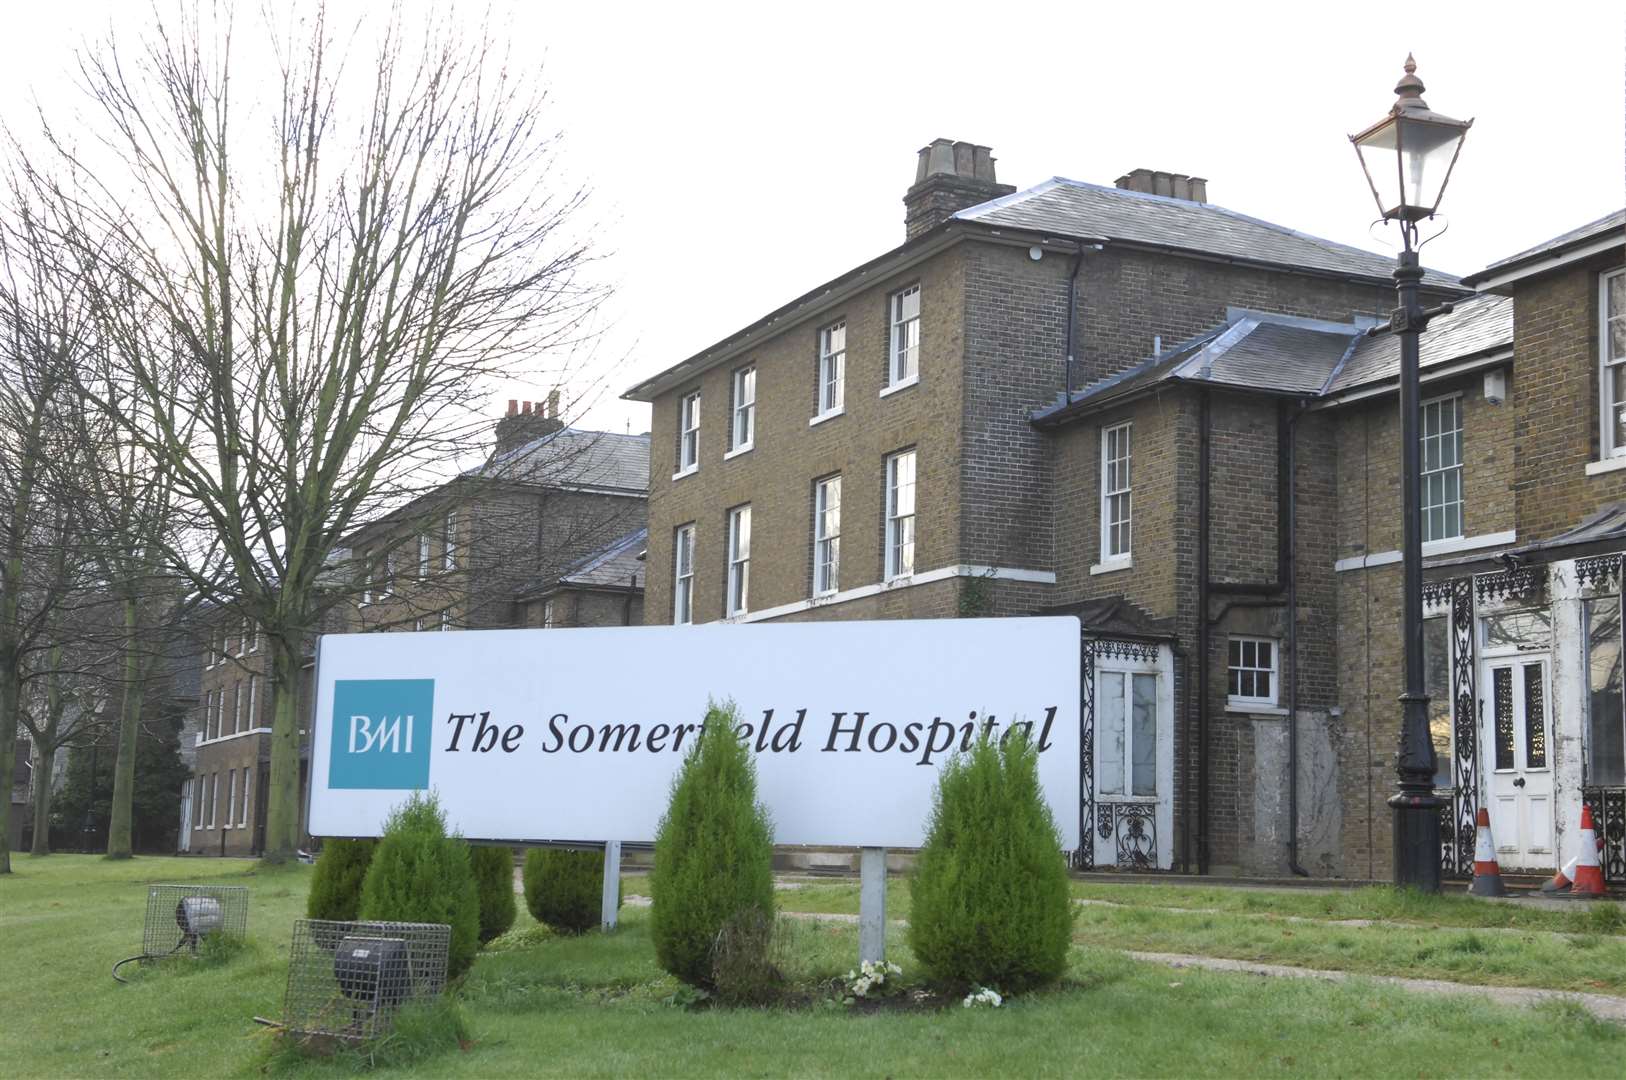 The BMI Somerfield Hospital, London Road, Maidstone. Picture: Martin Apps